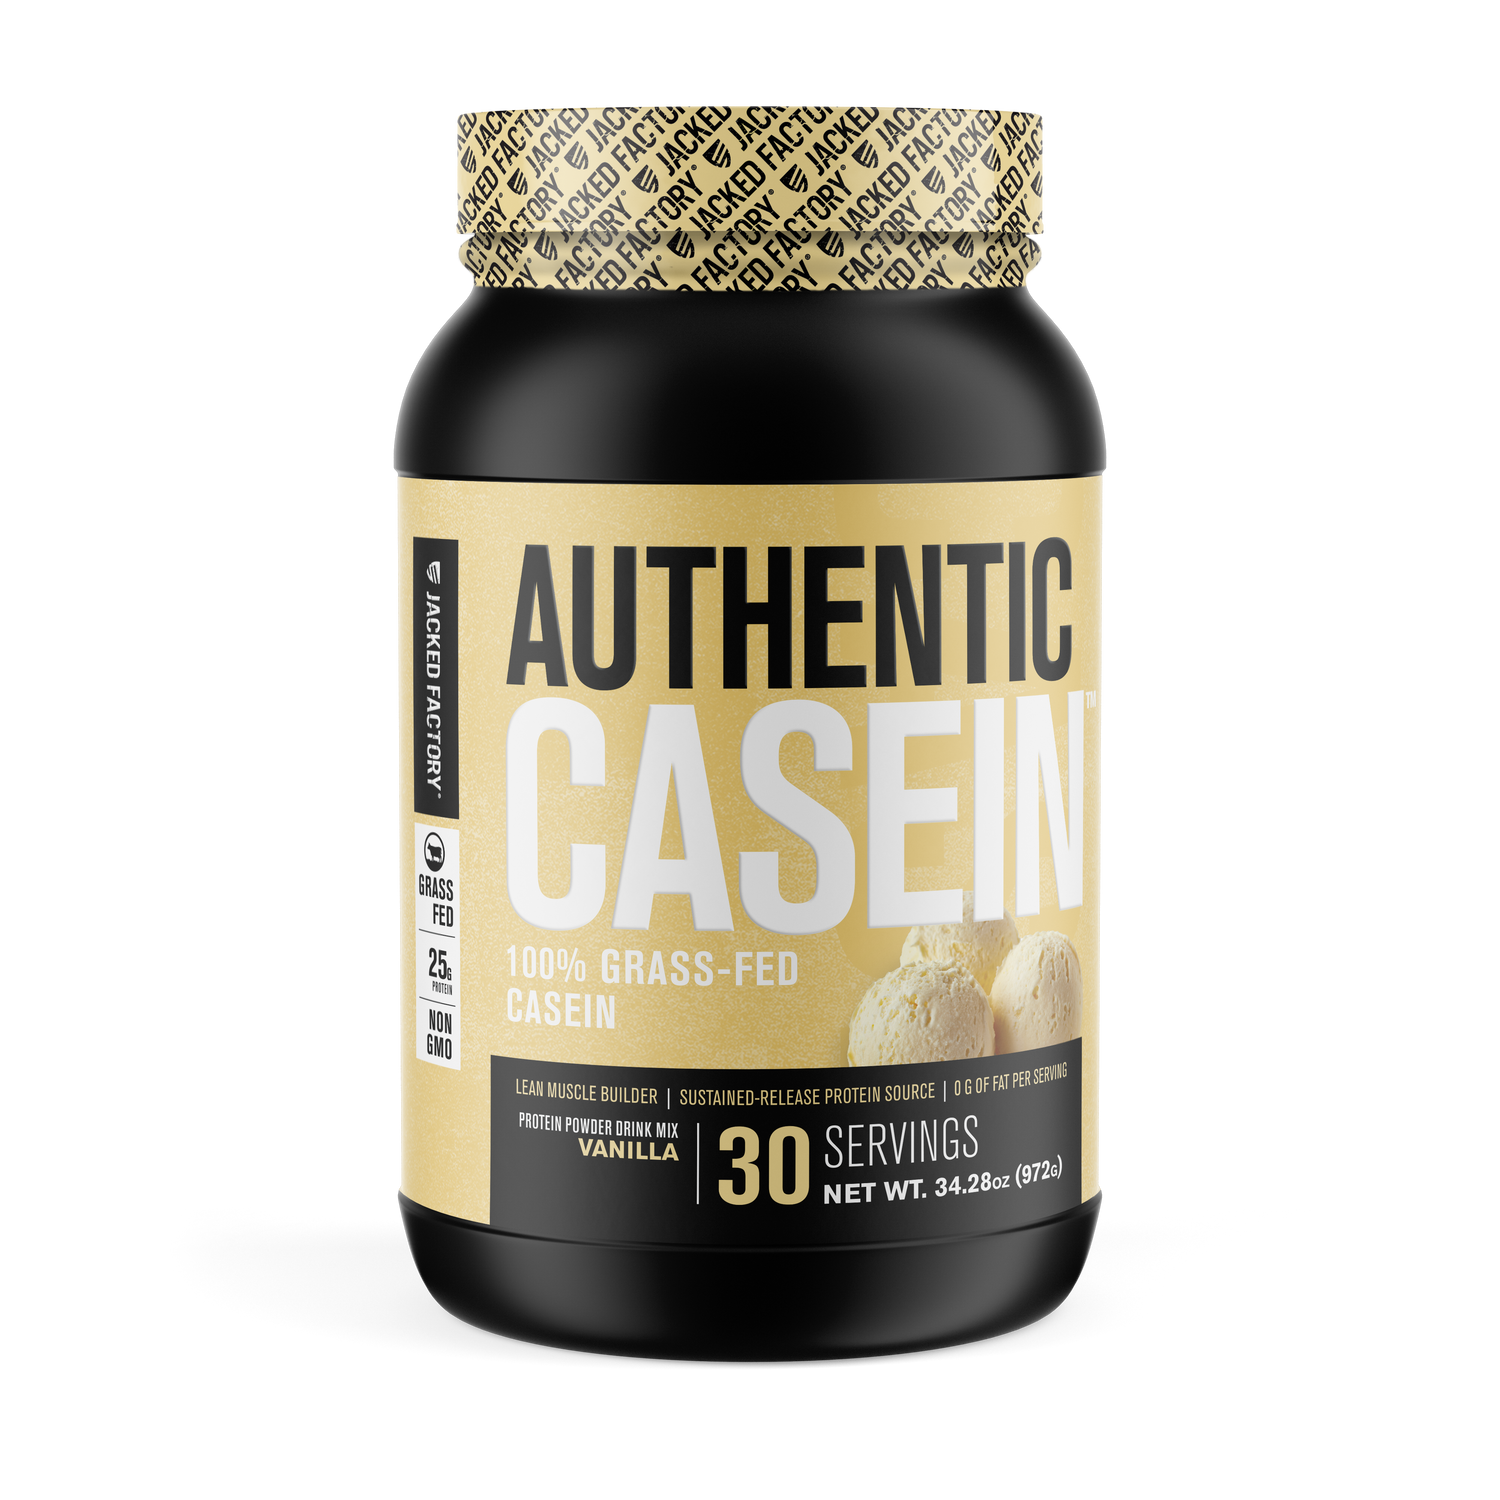 Jacked Factory's vanilla Authentic Casein 30 servings powder is a black bottle with cream colored label with vanilla ice cream image